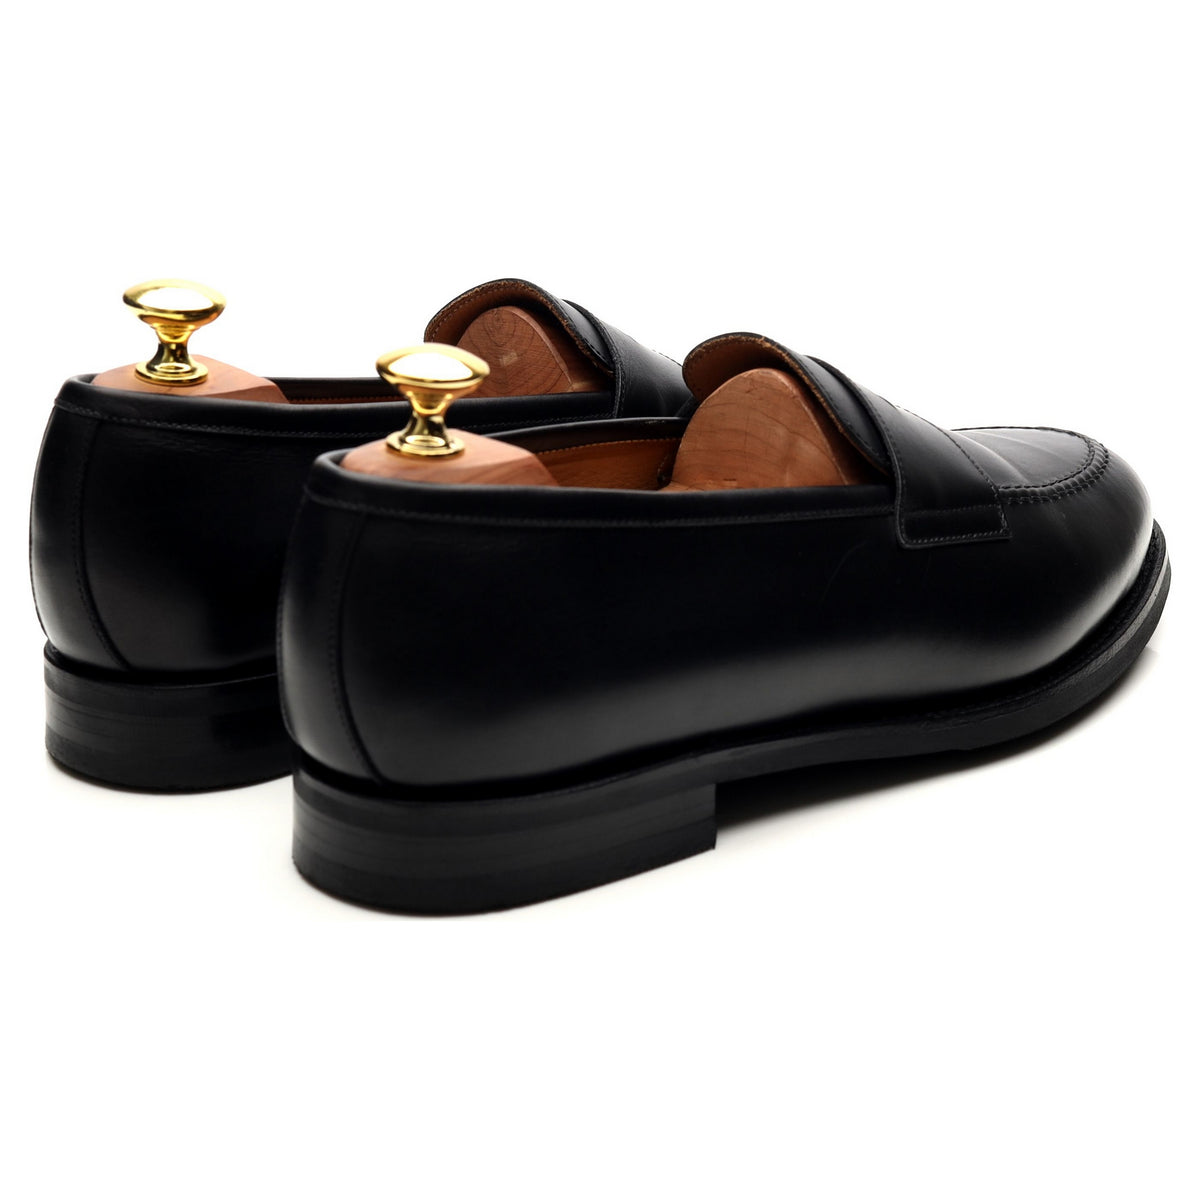 Black Leather Loafers UK 7.5